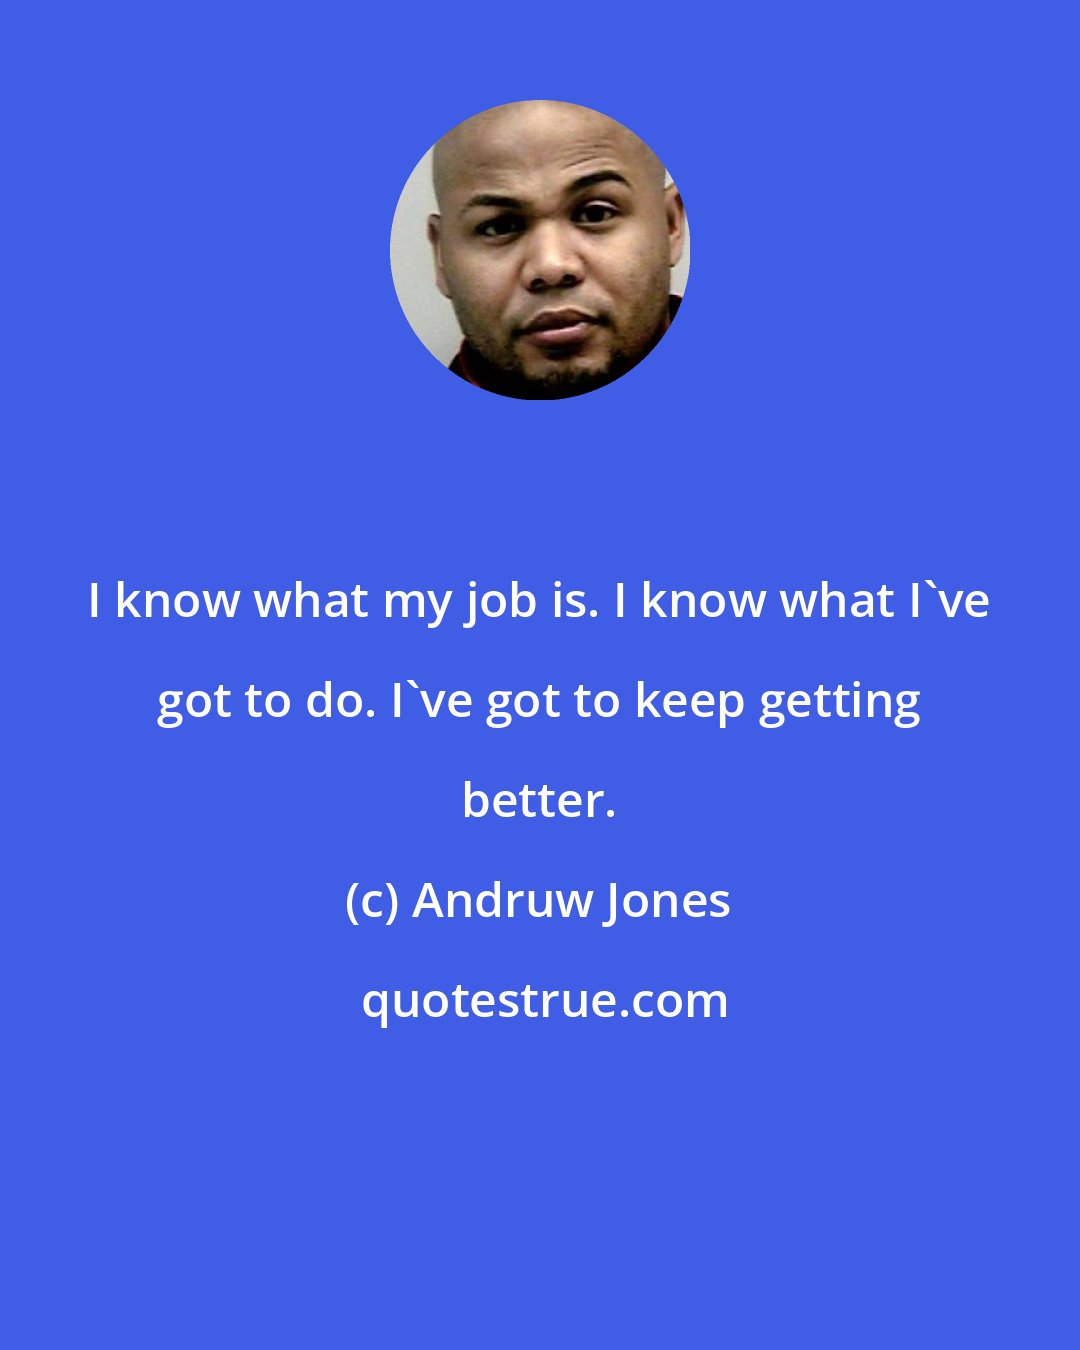 Andruw Jones: I know what my job is. I know what I've got to do. I've got to keep getting better.